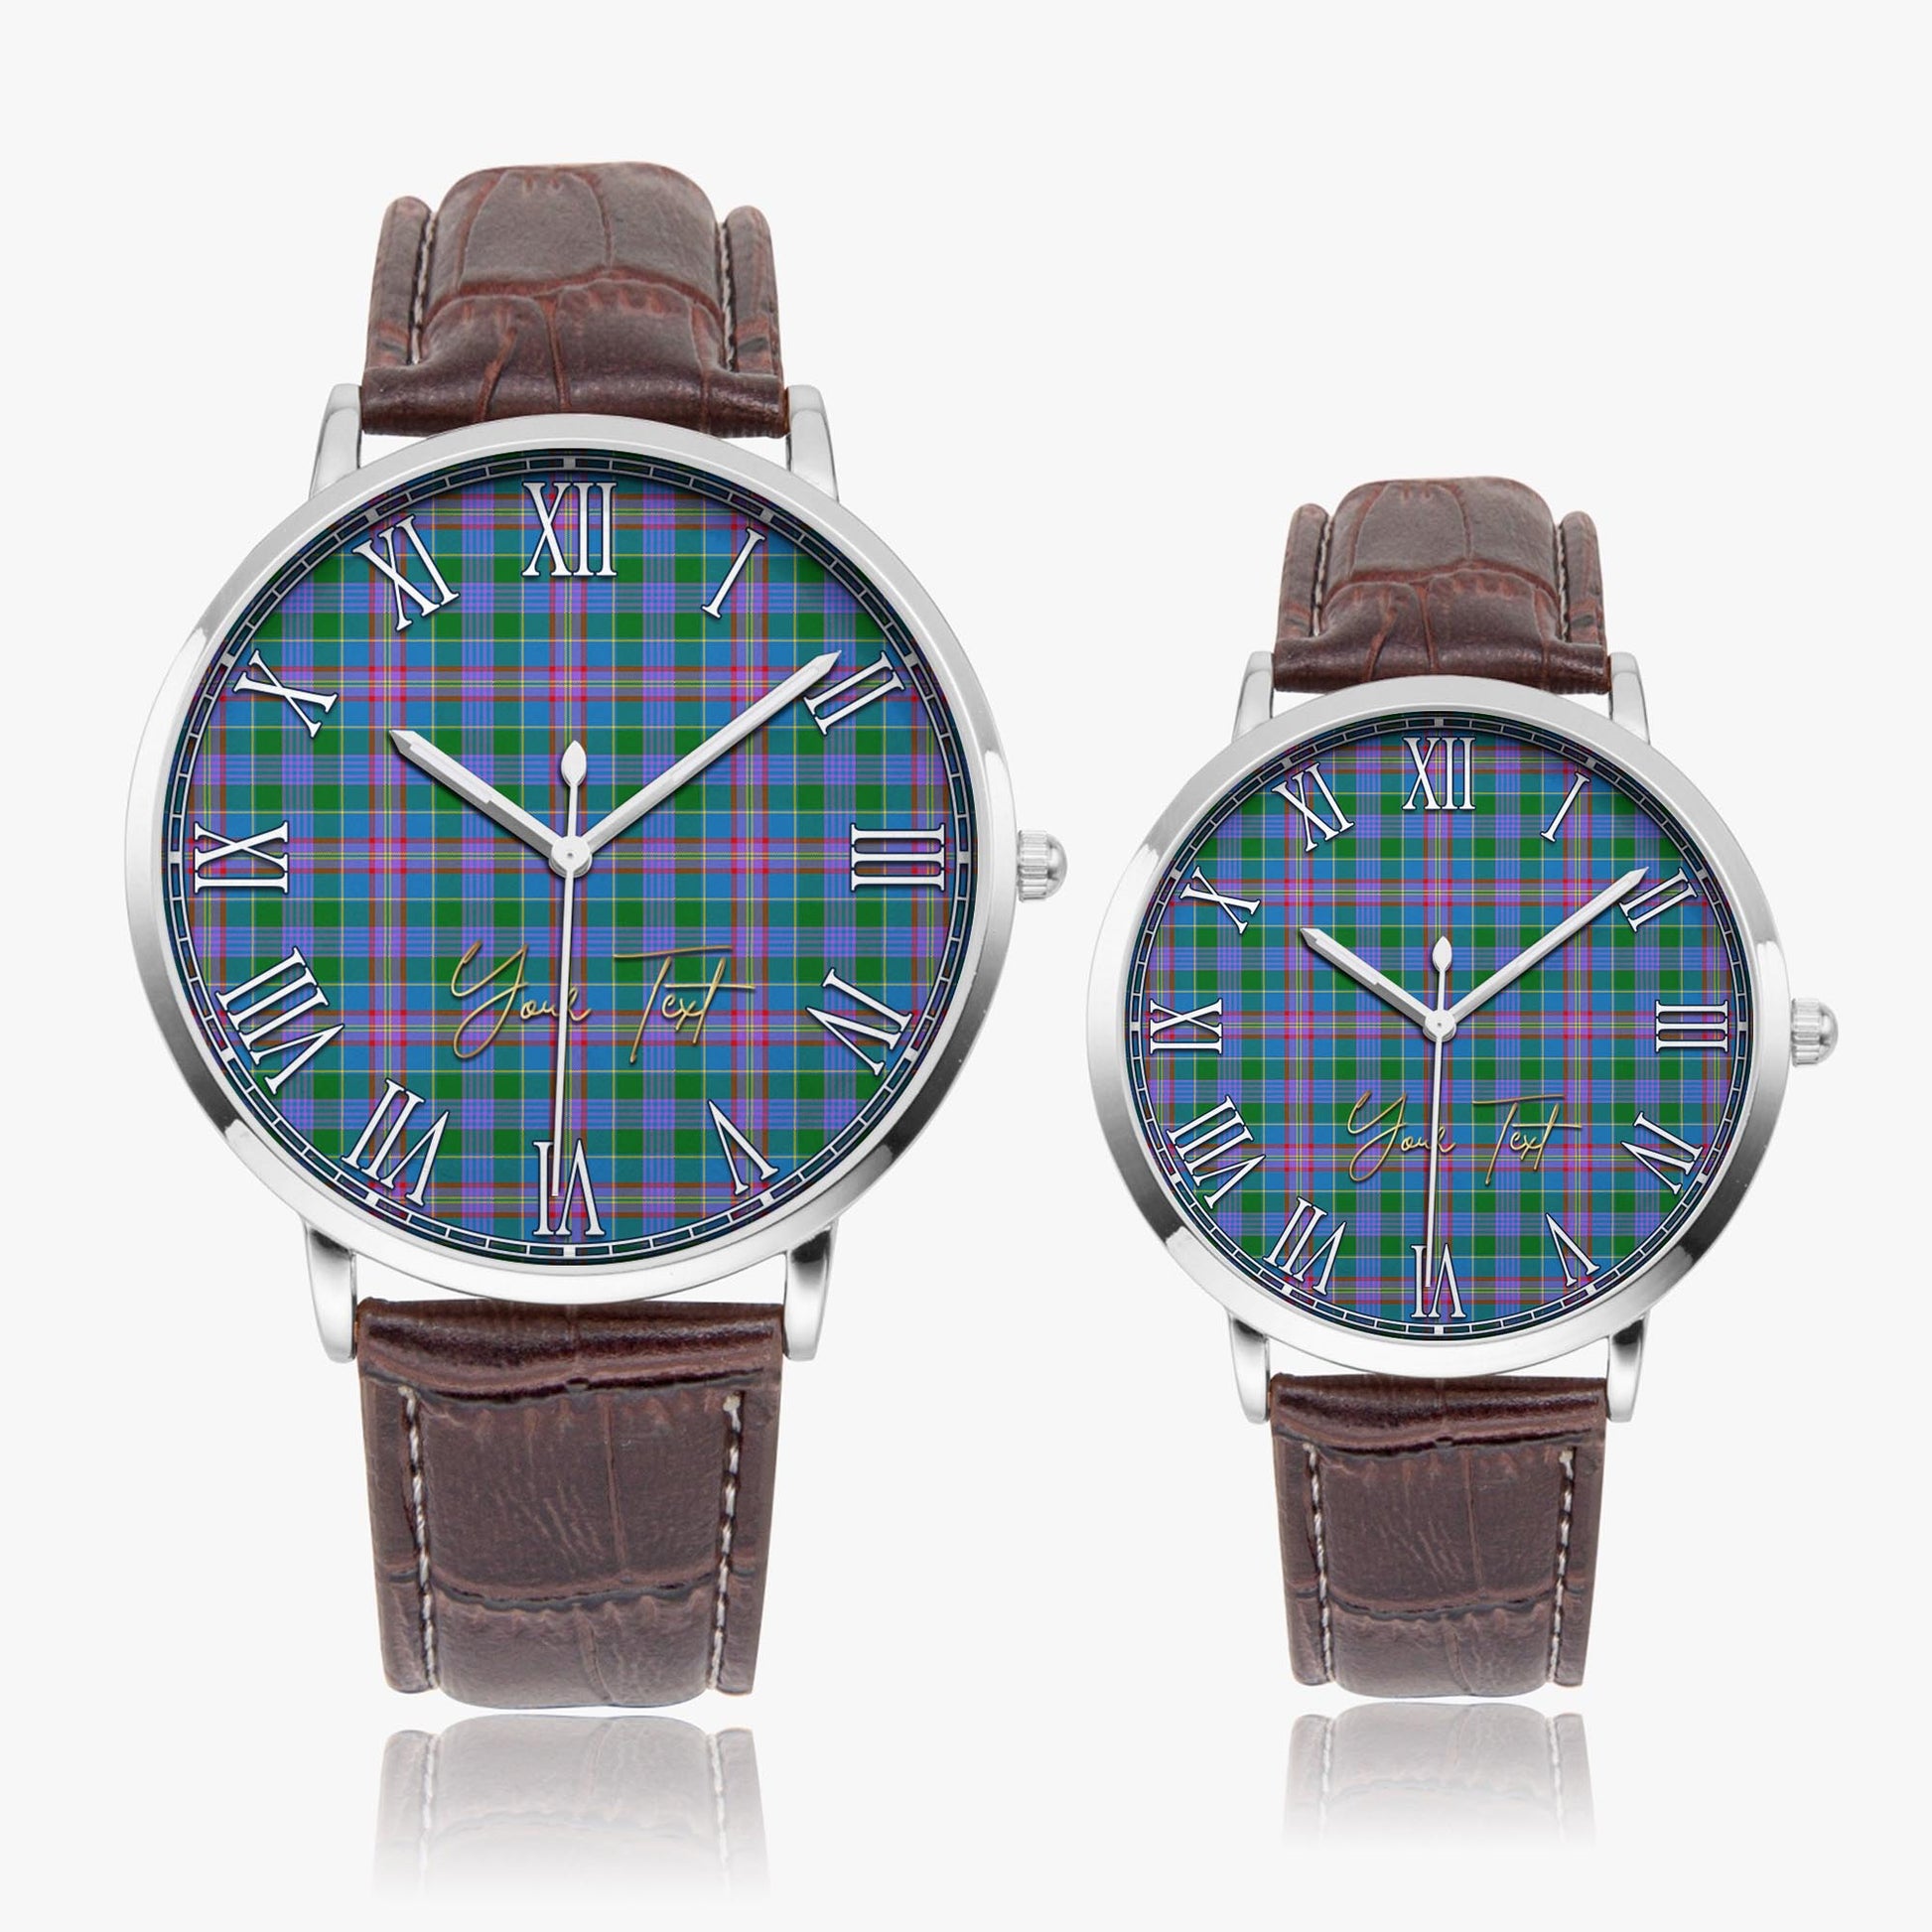 Ralston Tartan Personalized Your Text Leather Trap Quartz Watch Ultra Thin Silver Case With Brown Leather Strap - Tartanvibesclothing